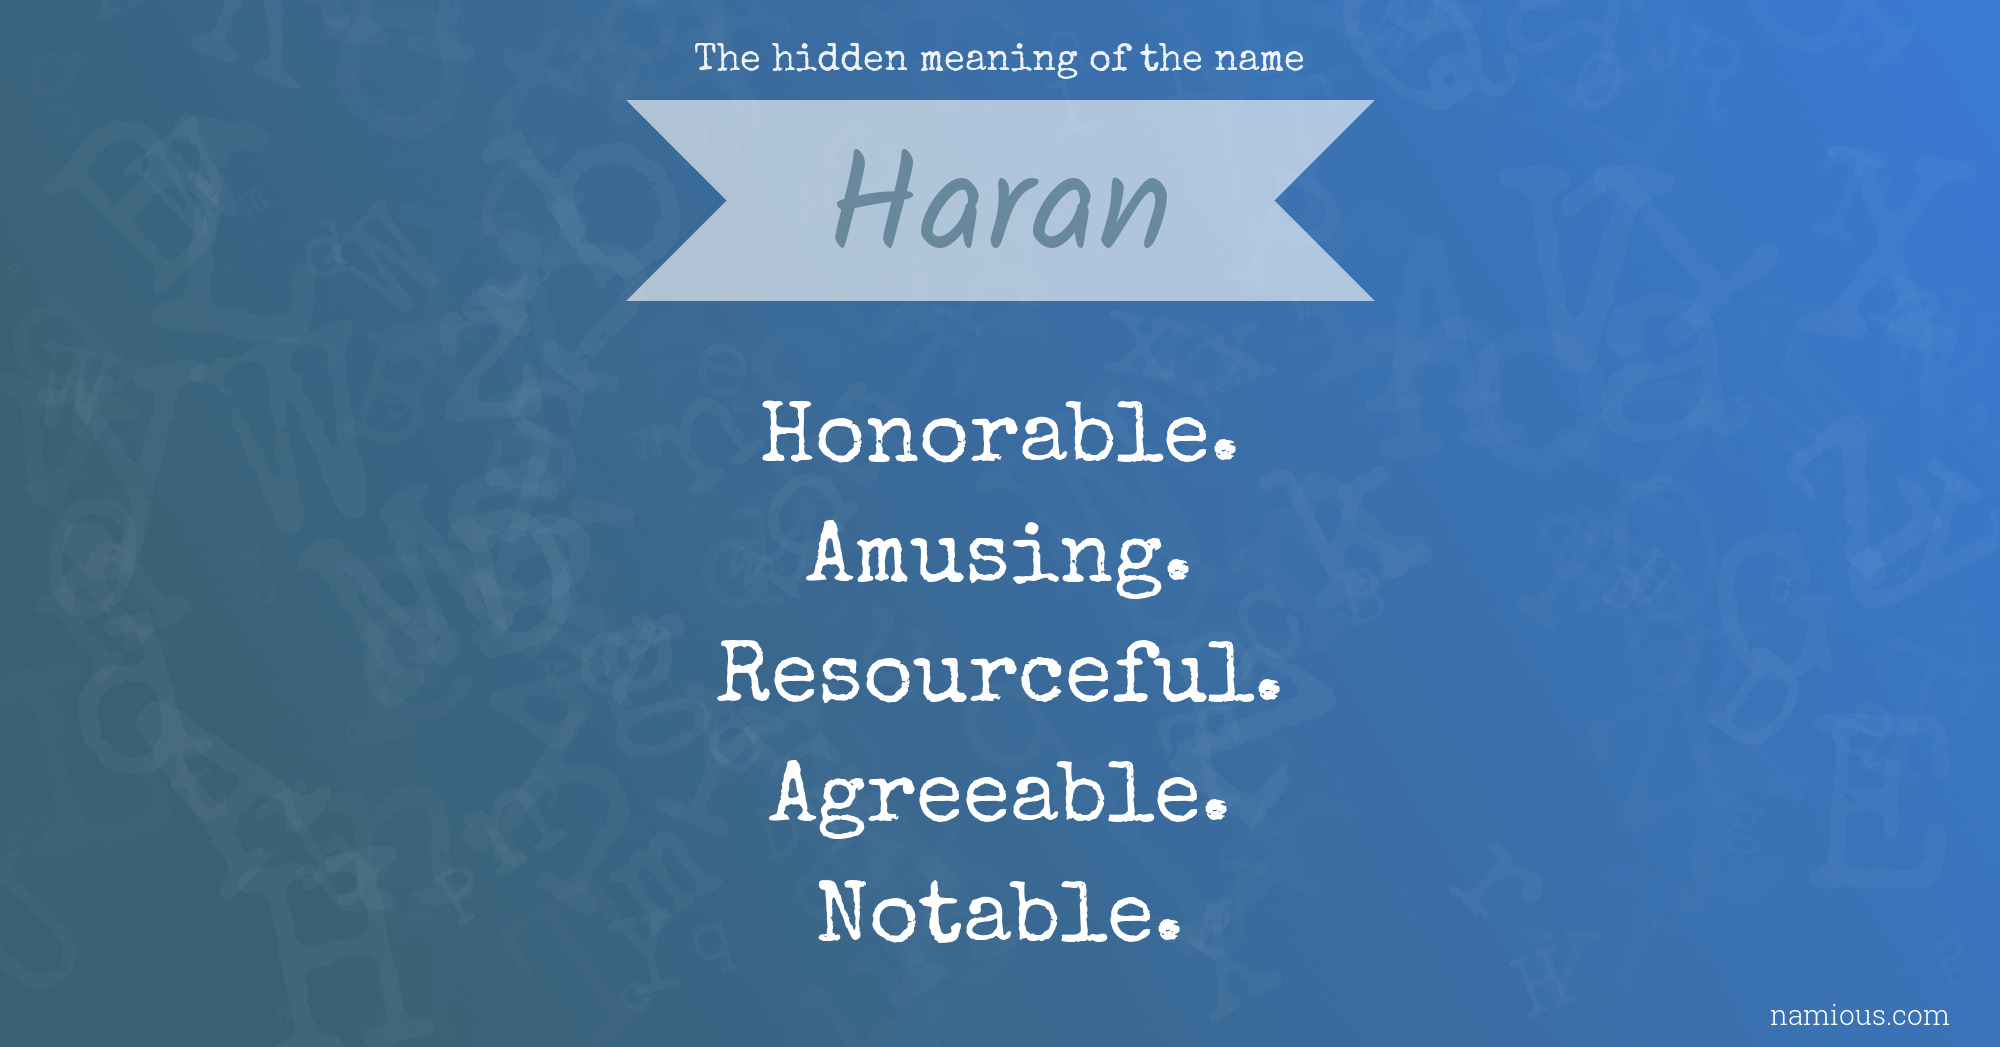 The hidden meaning of the name Haran